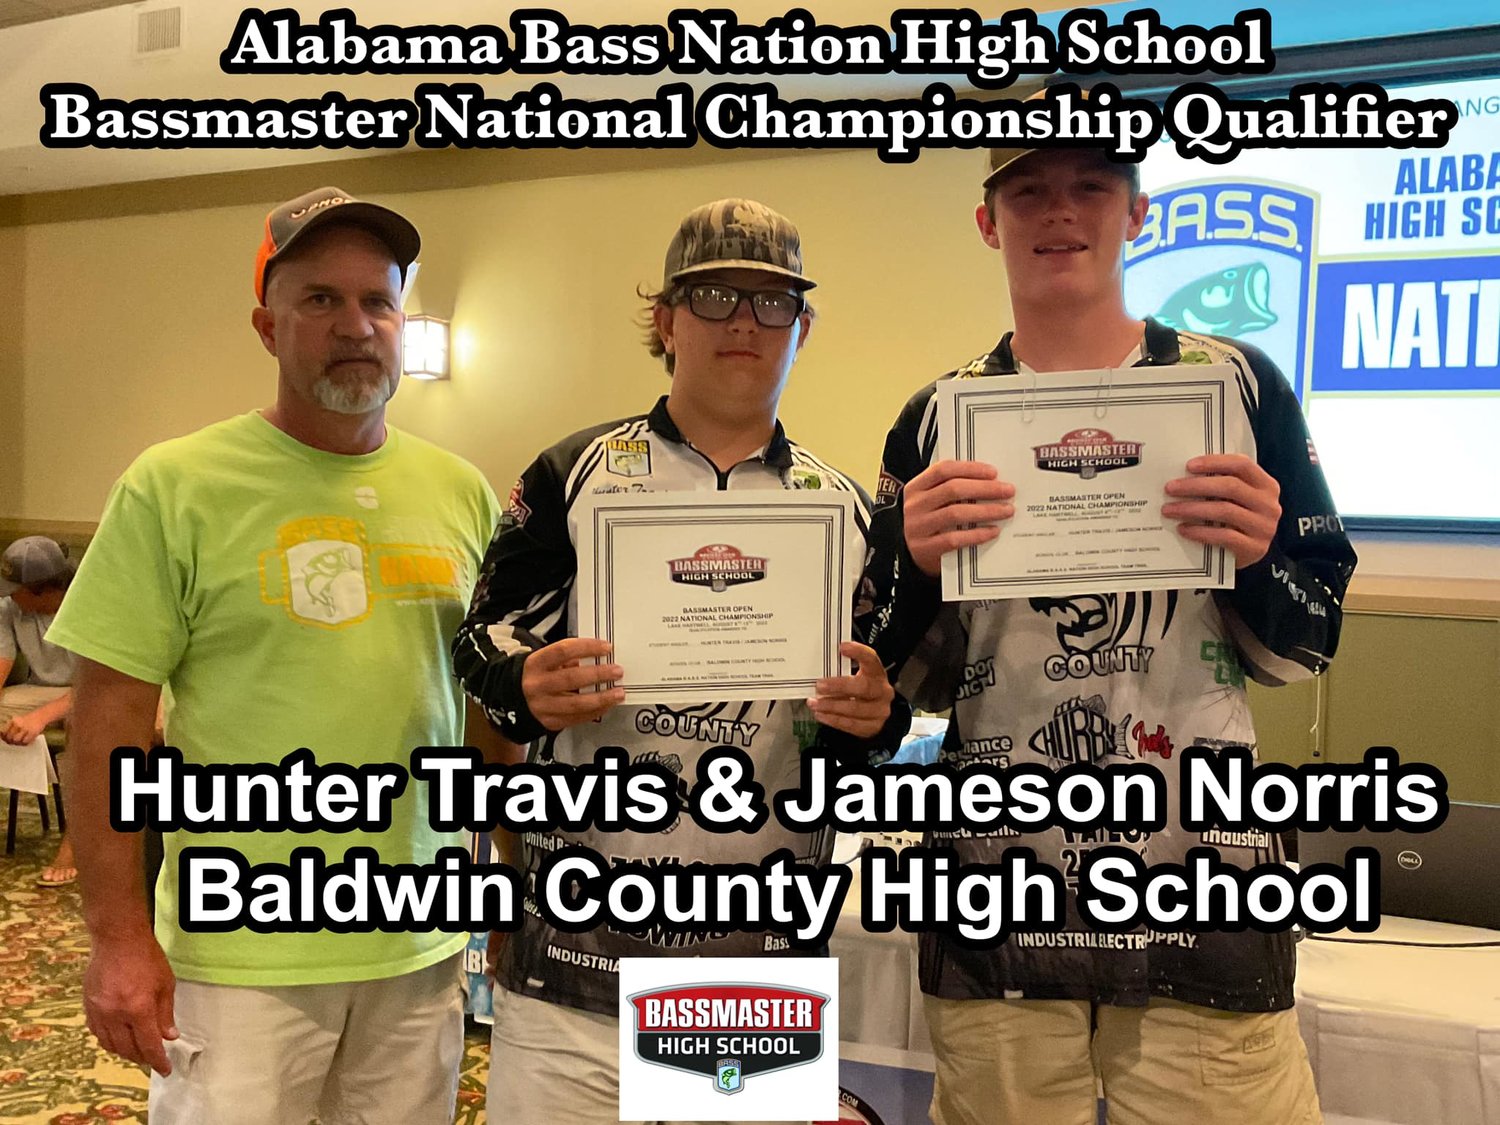 Baldwin County High School’s Hunter Travis and Jameson Norris were joined by Chance and Noah Bryars in qualifying for the Alabama Bass Nation High School Bassmaster National Championship after last weekend’s state championships on Lake Eufala.